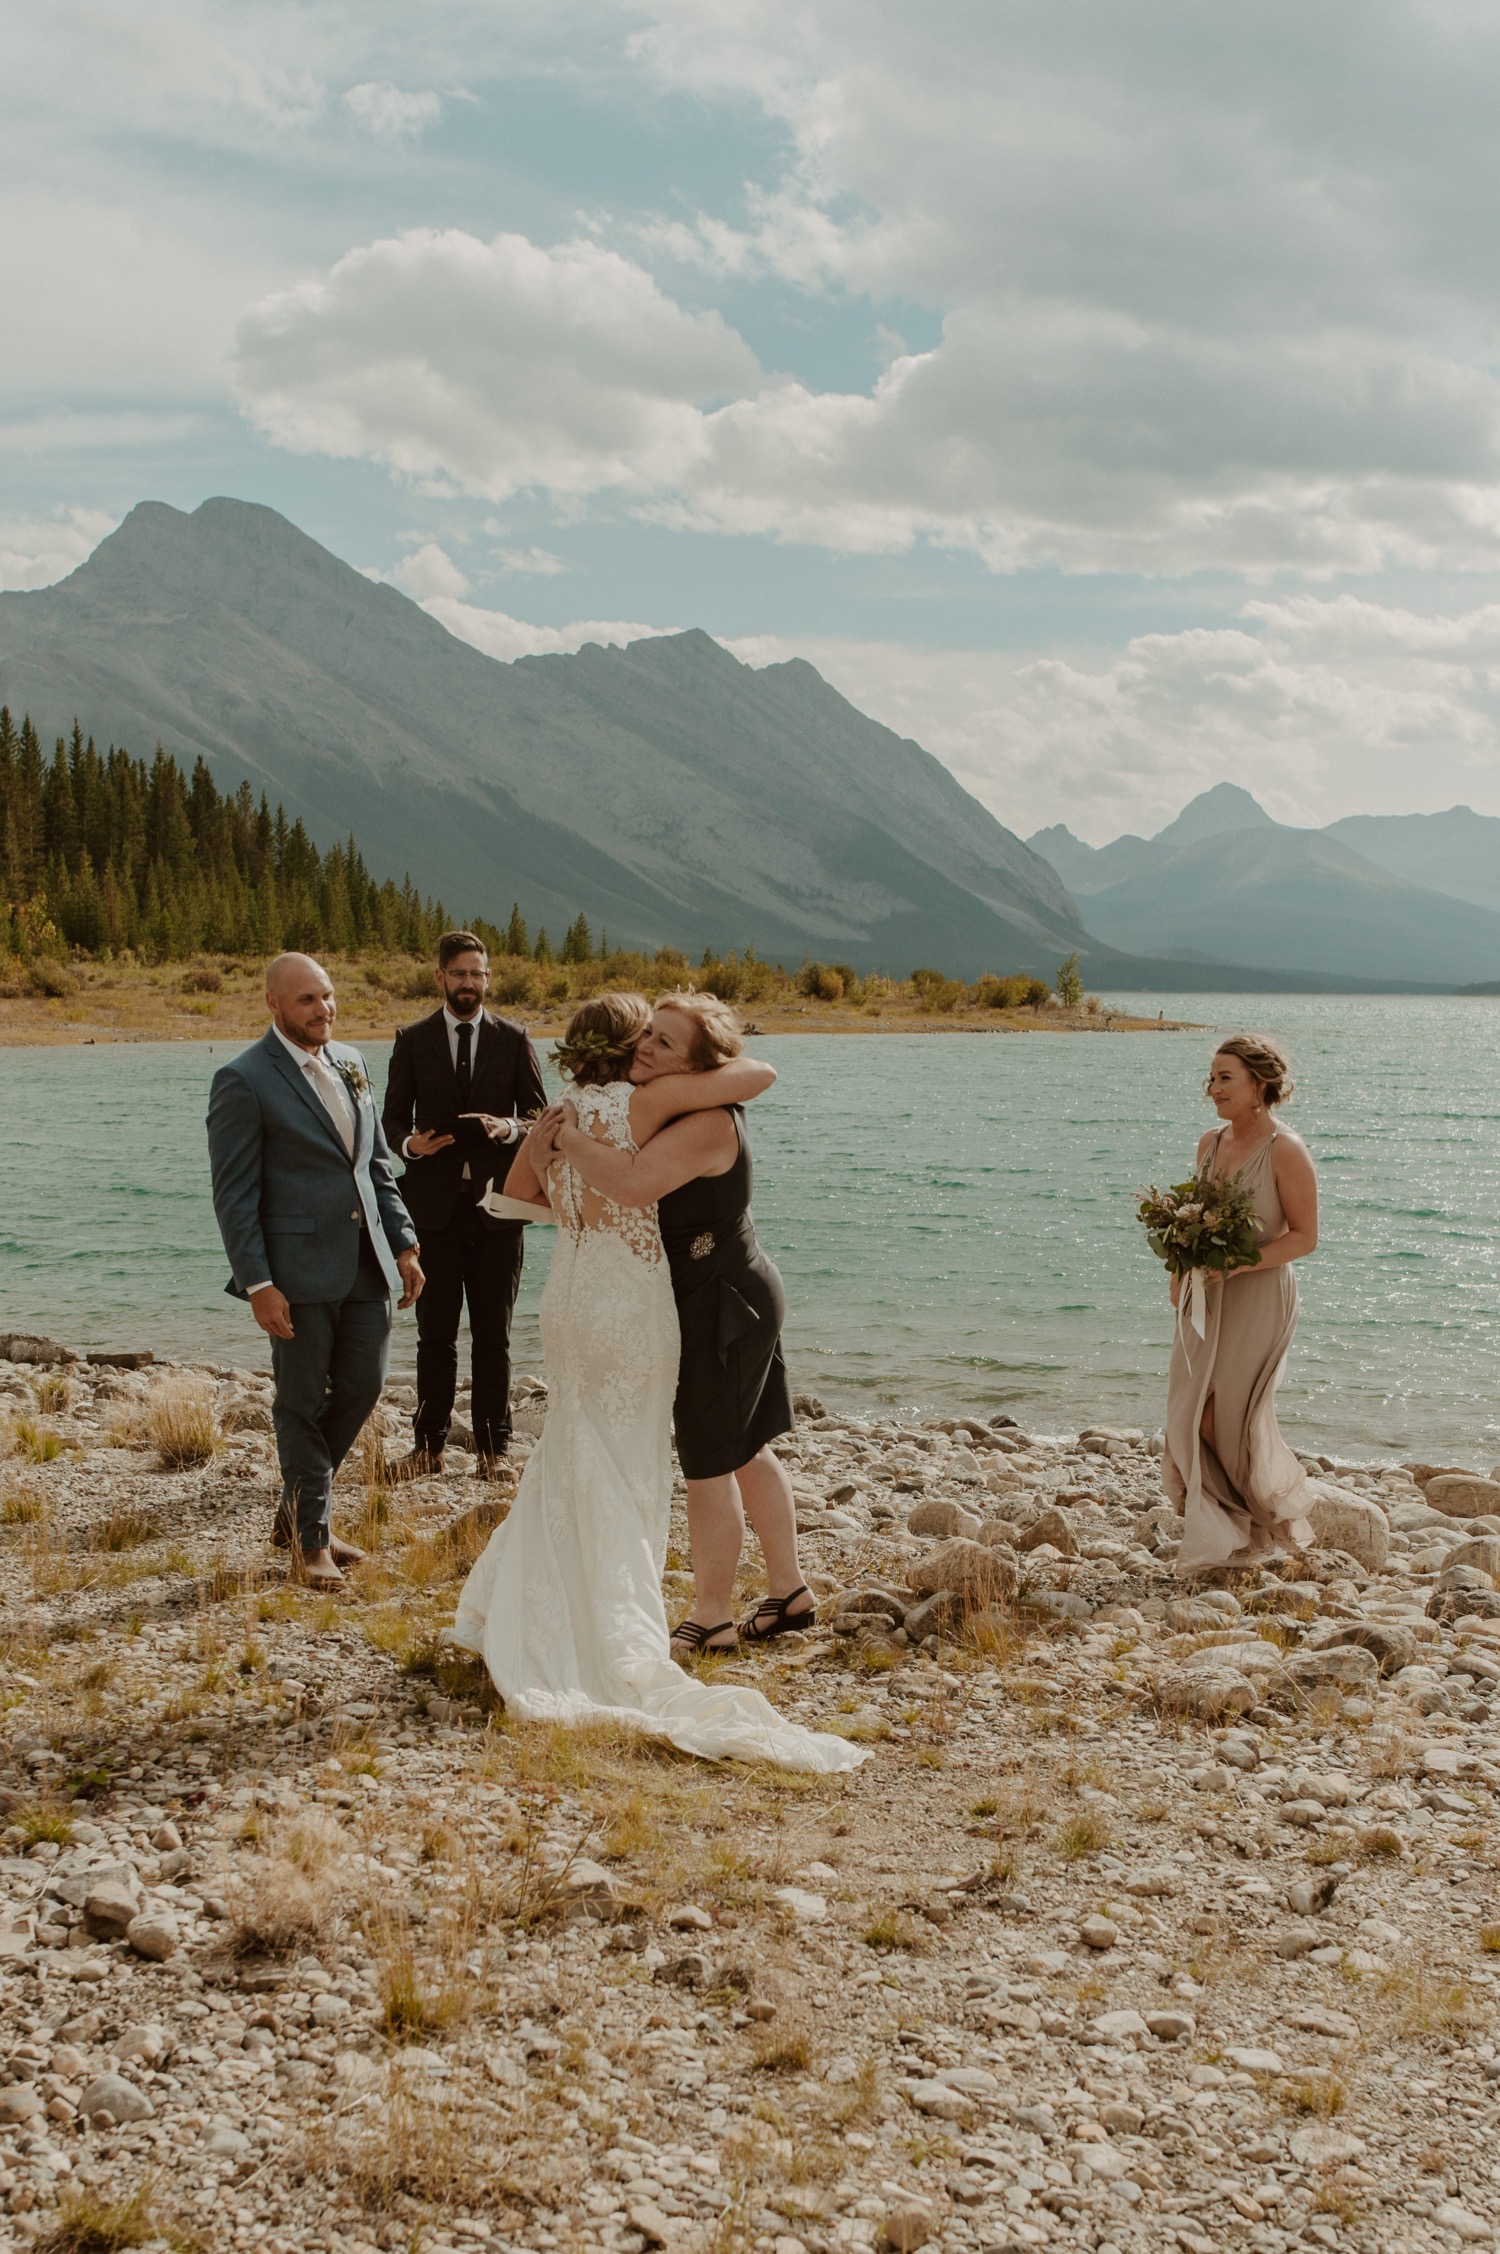 The mother walks the bride down the make shift aisle for their ceremony on the shore of Spray Lakes Alberta